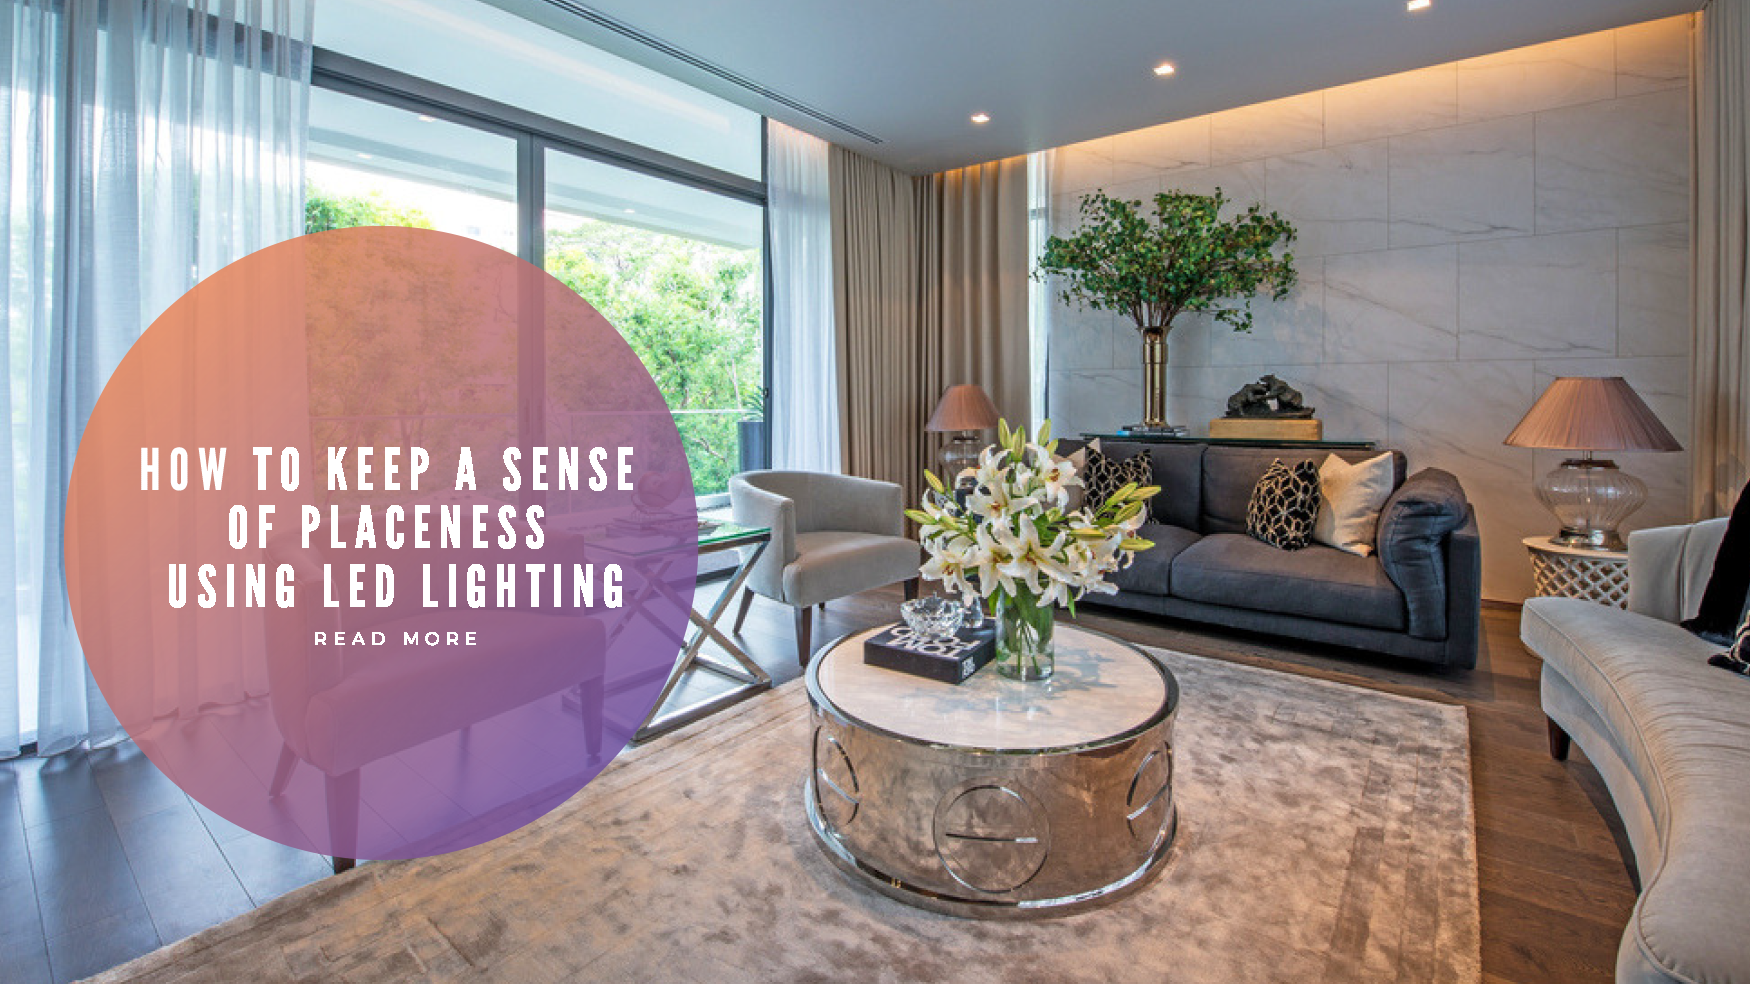 How to Keep a Sense of Placeness Using LED Lighting